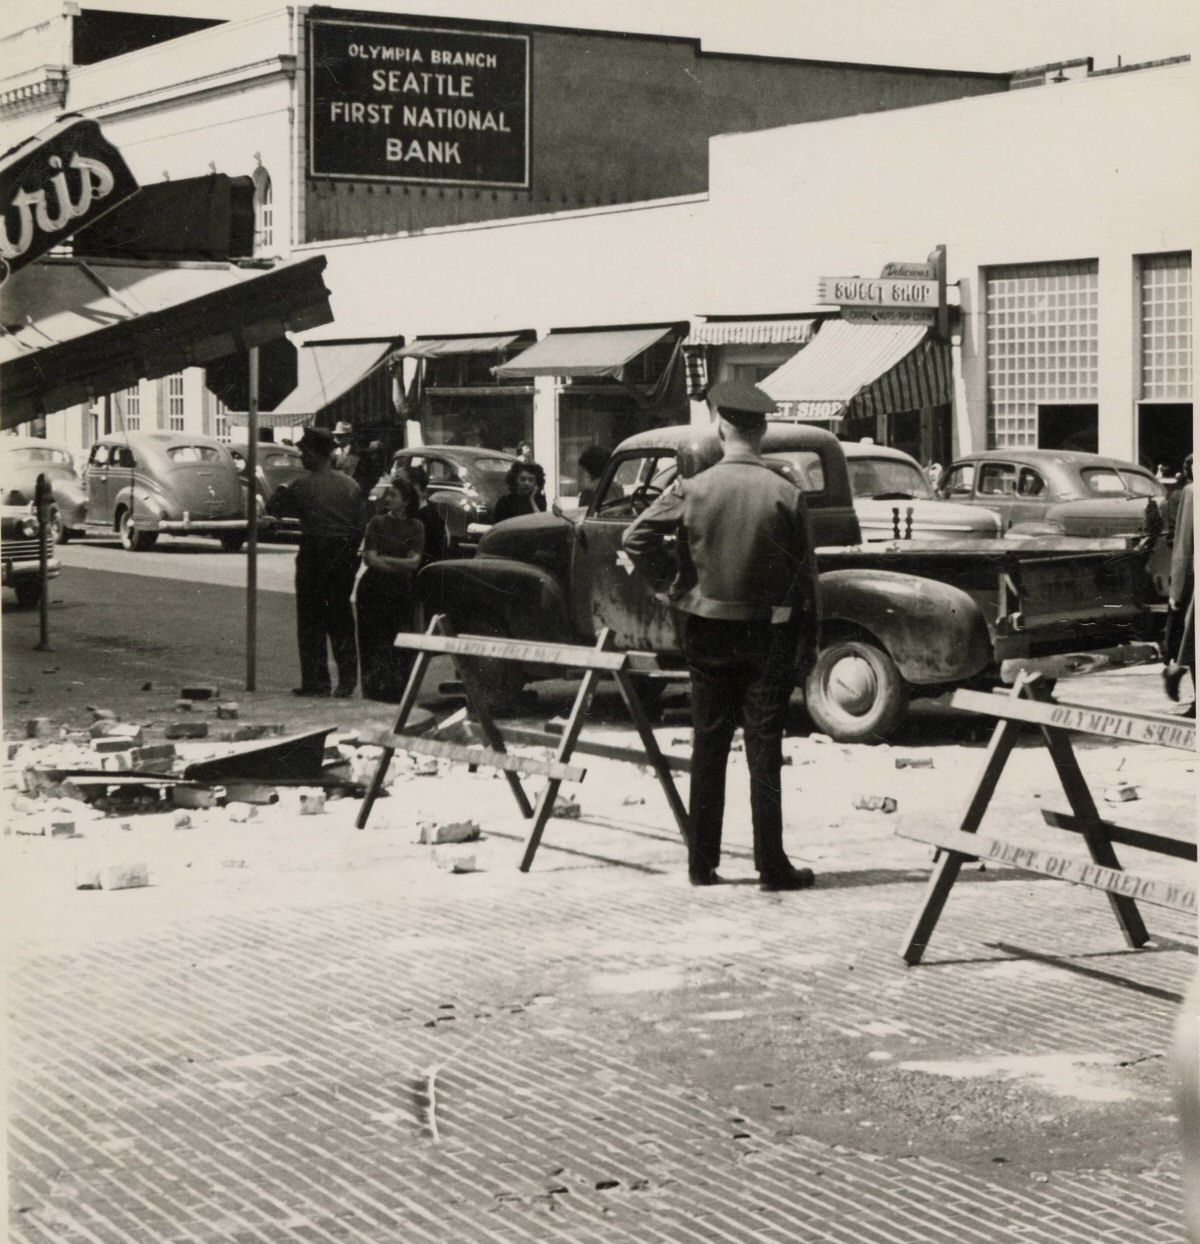 Damage on Fifth Avenue after Olympia earthquake, 1949